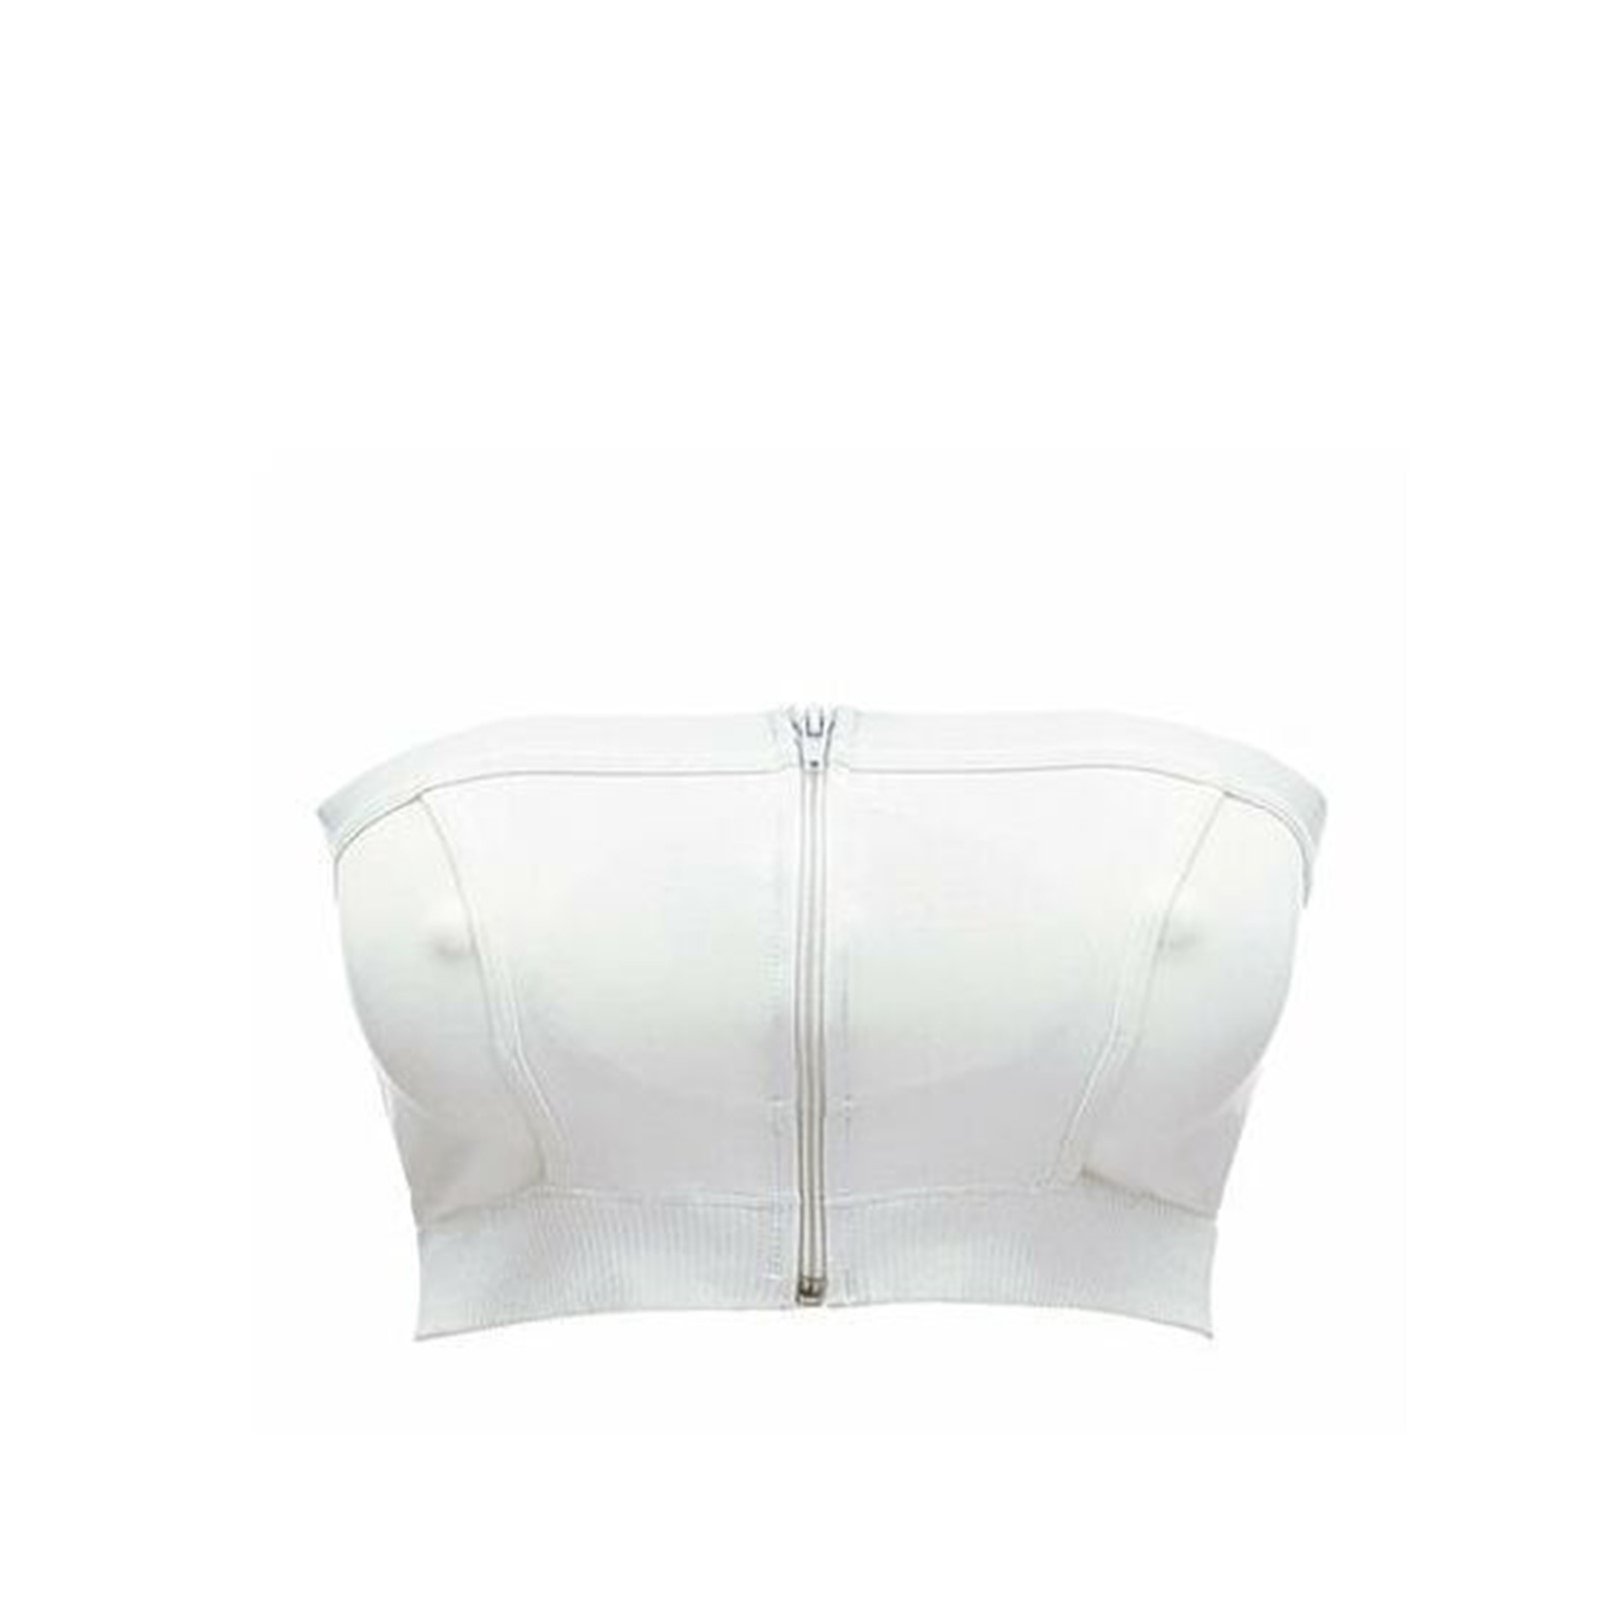 Buy Medela Hands-Free Pumping Bustier White Medium Size x1 · Antigua and  Barbuda